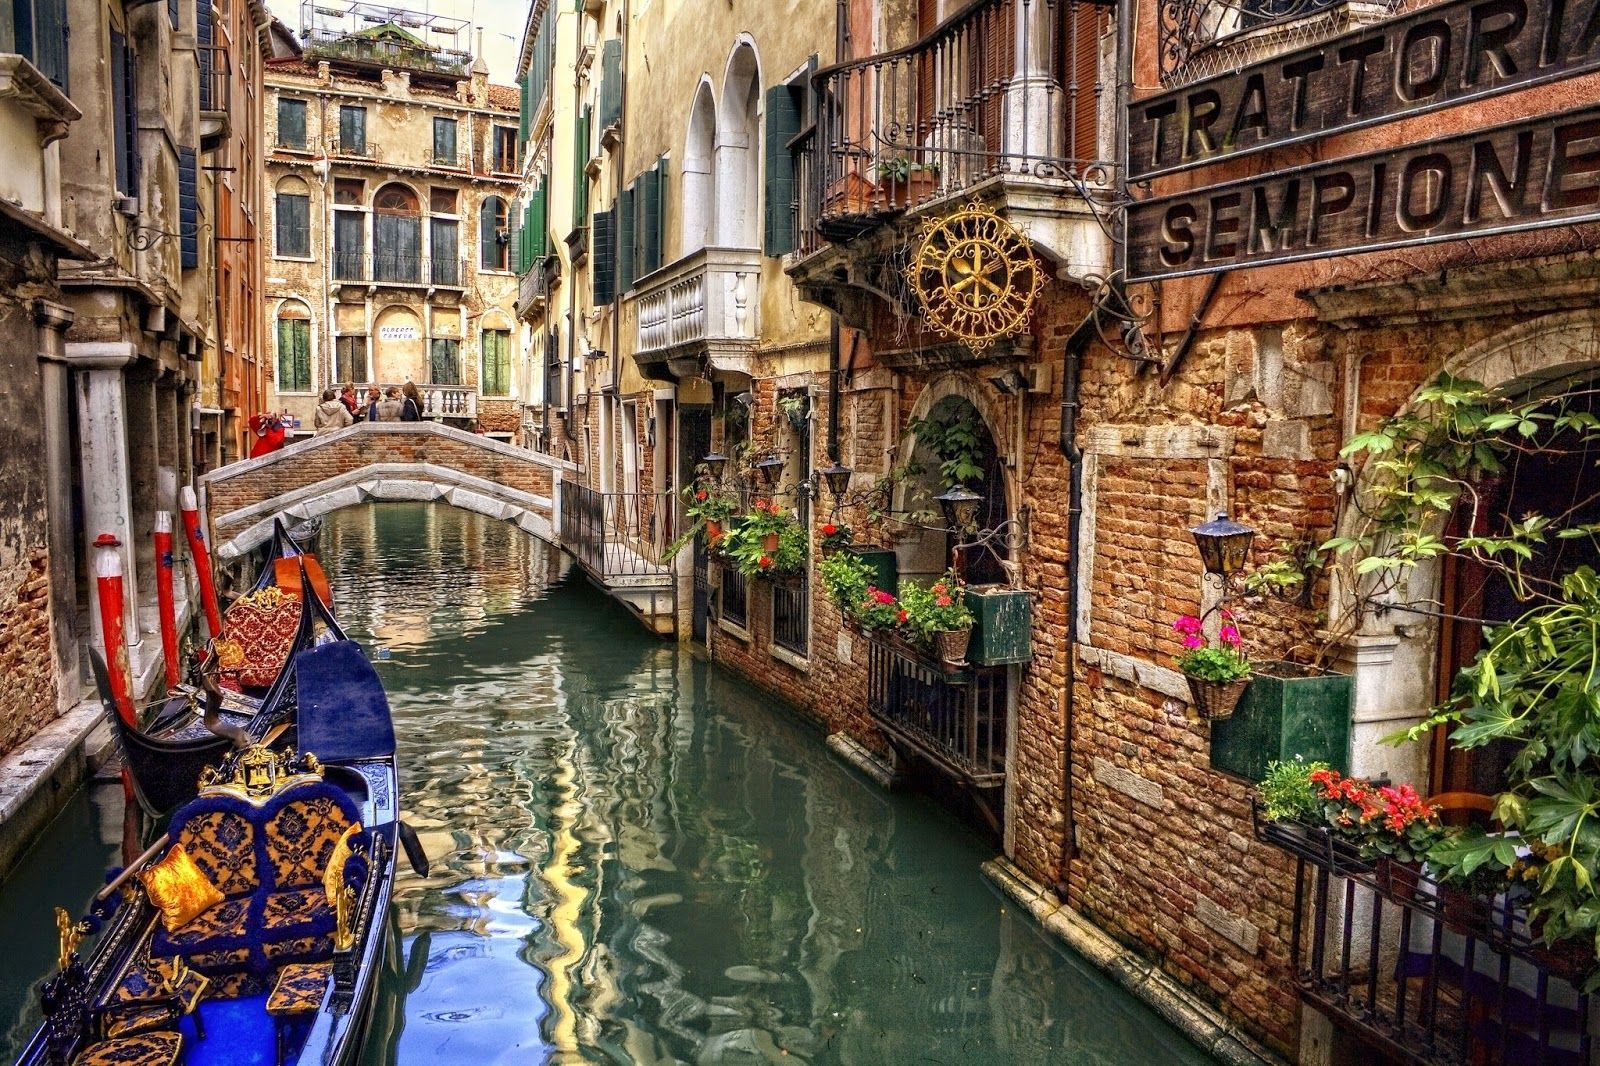 VENICE ITALY WALLPAPERS. Venice canals, Venice italy, Visit venice